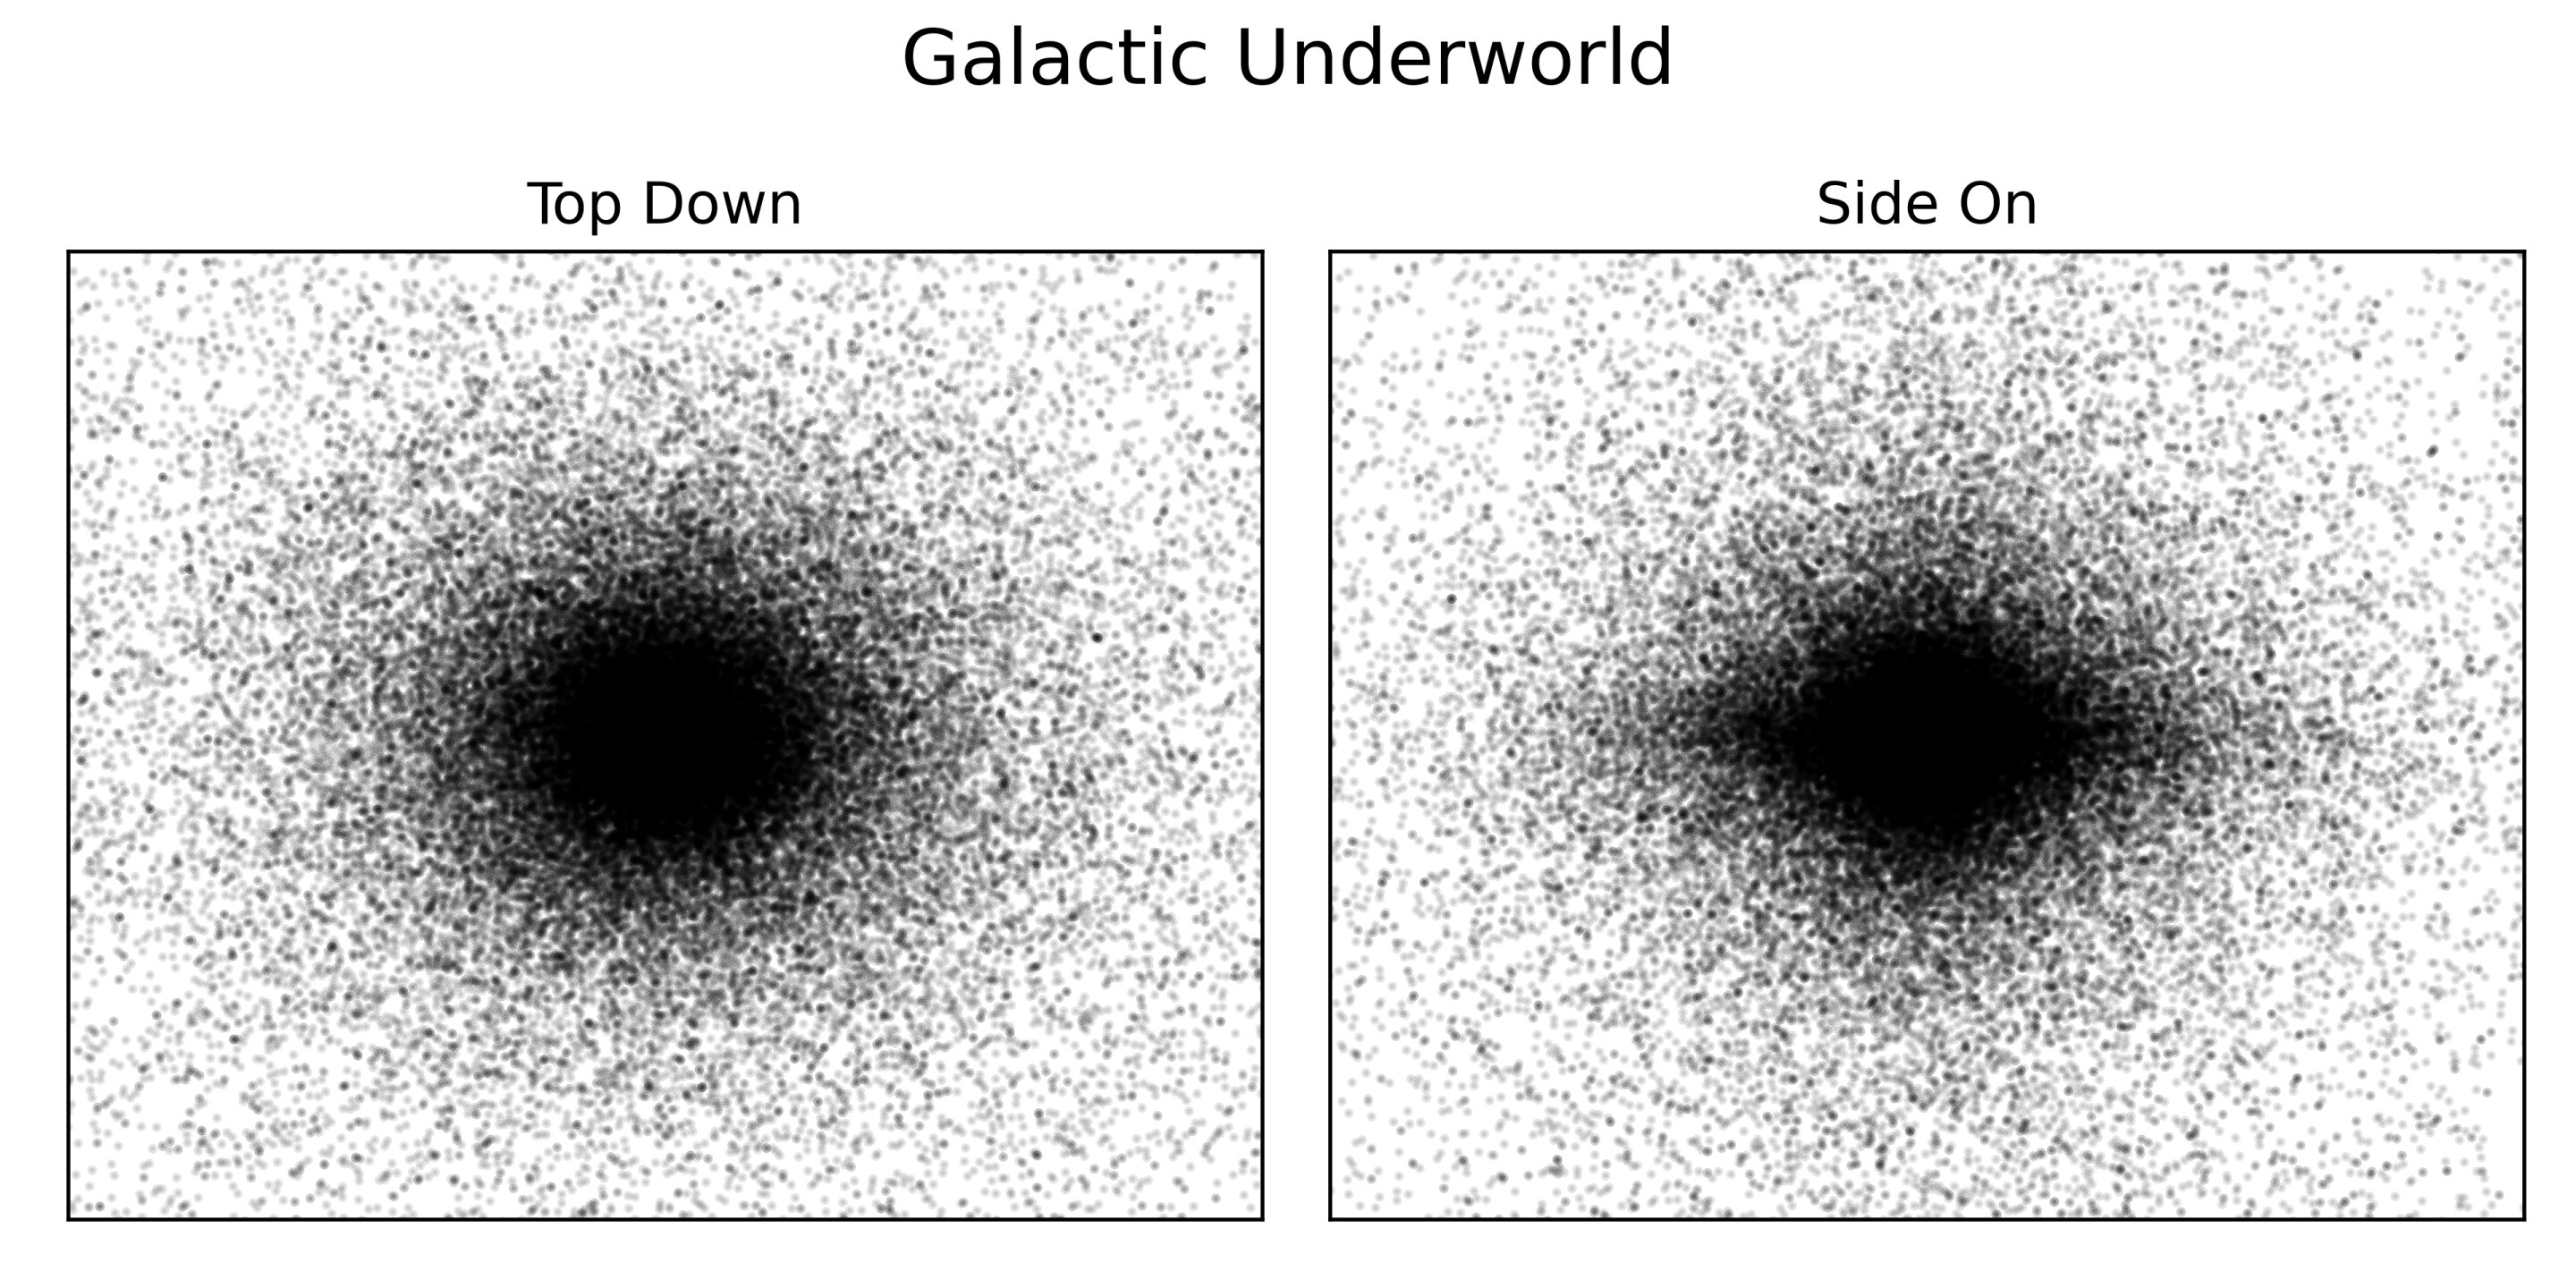 A simulation showing the distribution of black holes and neutron stars in the 'galactic underworld'